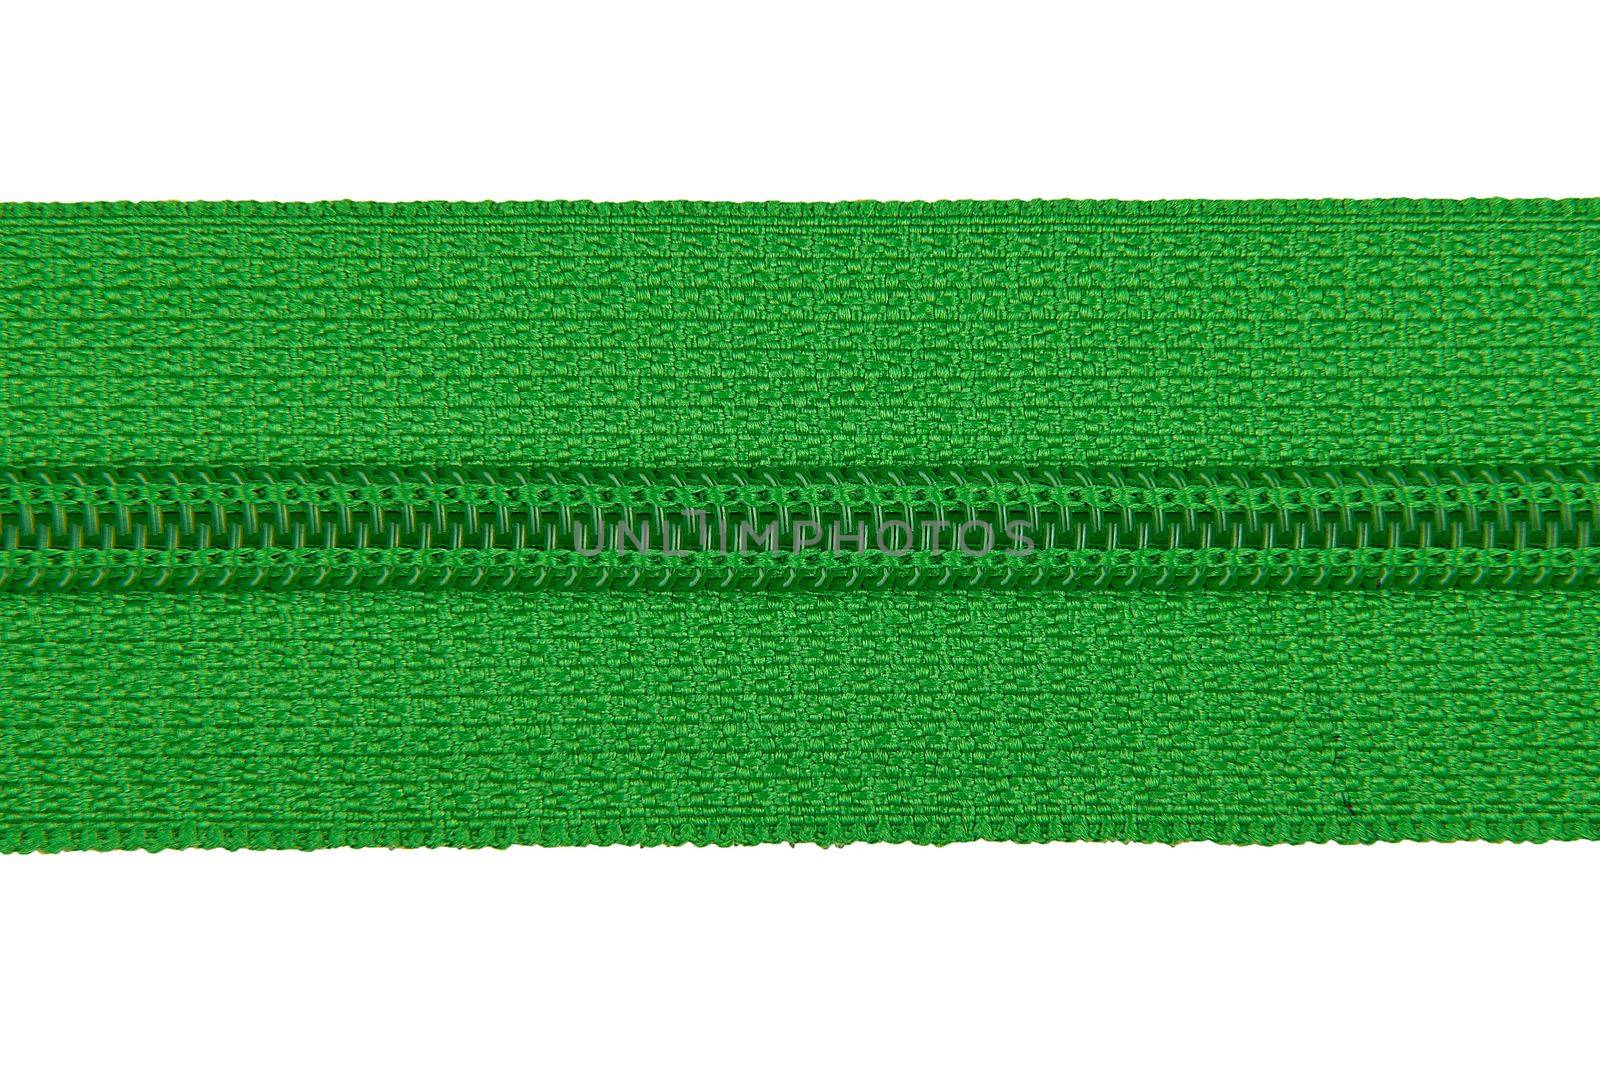 Closed green zipper isolated on white background. Green zipper for tailor sewing. View from above